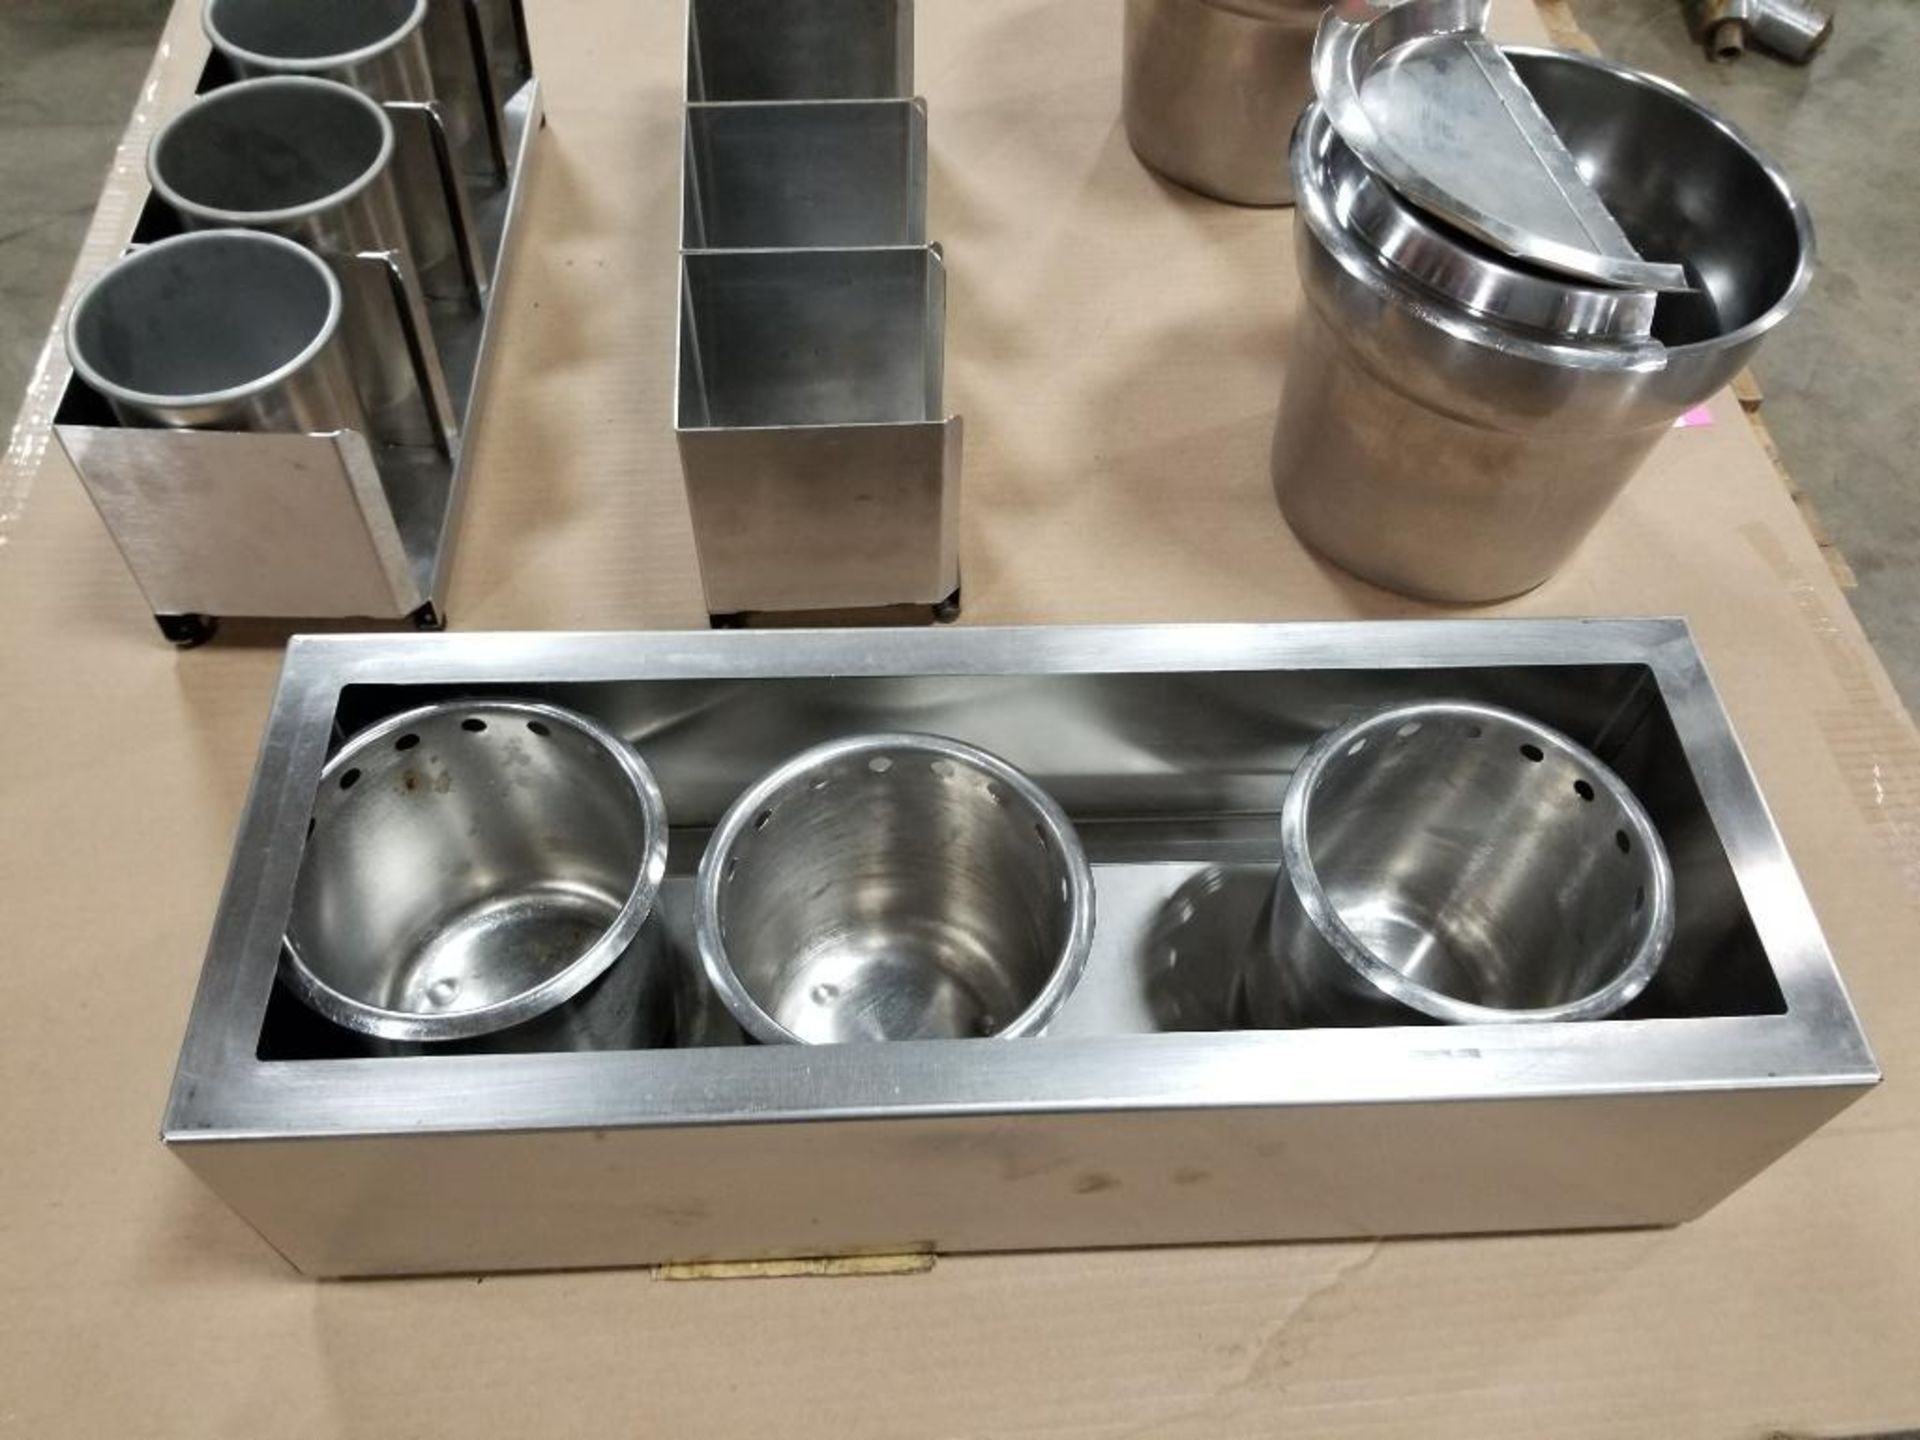 Stainless steel steam table and containers. - Image 12 of 16